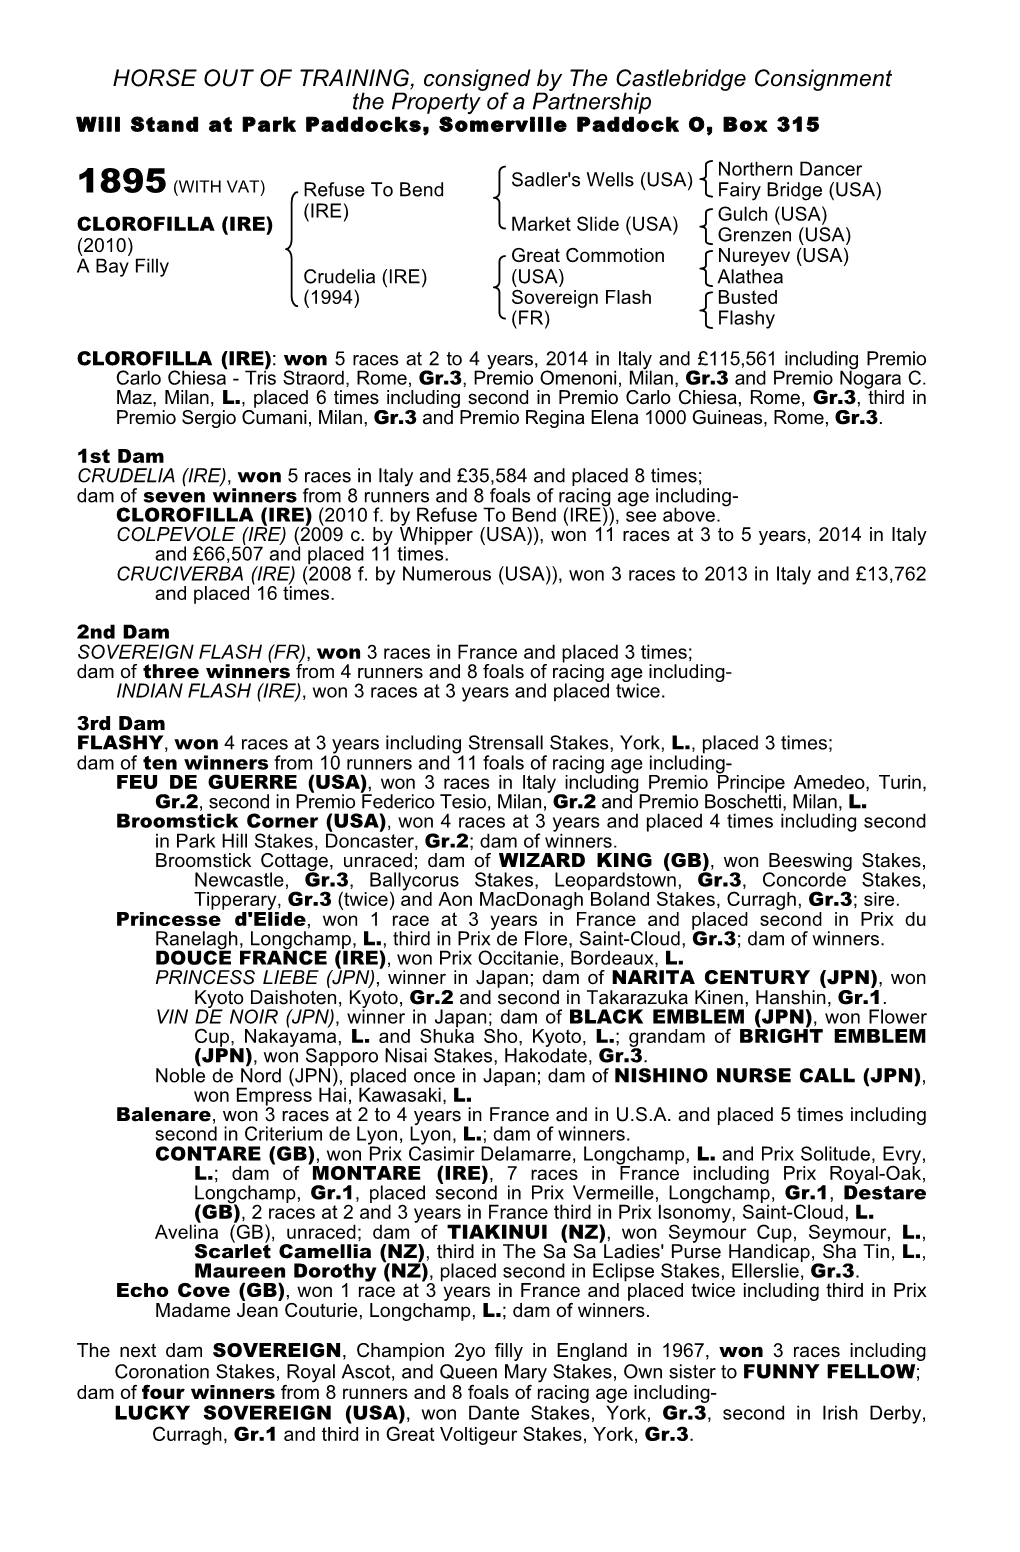 HORSE out of TRAINING, Consigned by the Castlebridge Consignment the Property of a Partnership Will Stand at Park Paddocks, Somerville Paddock O, Box 315